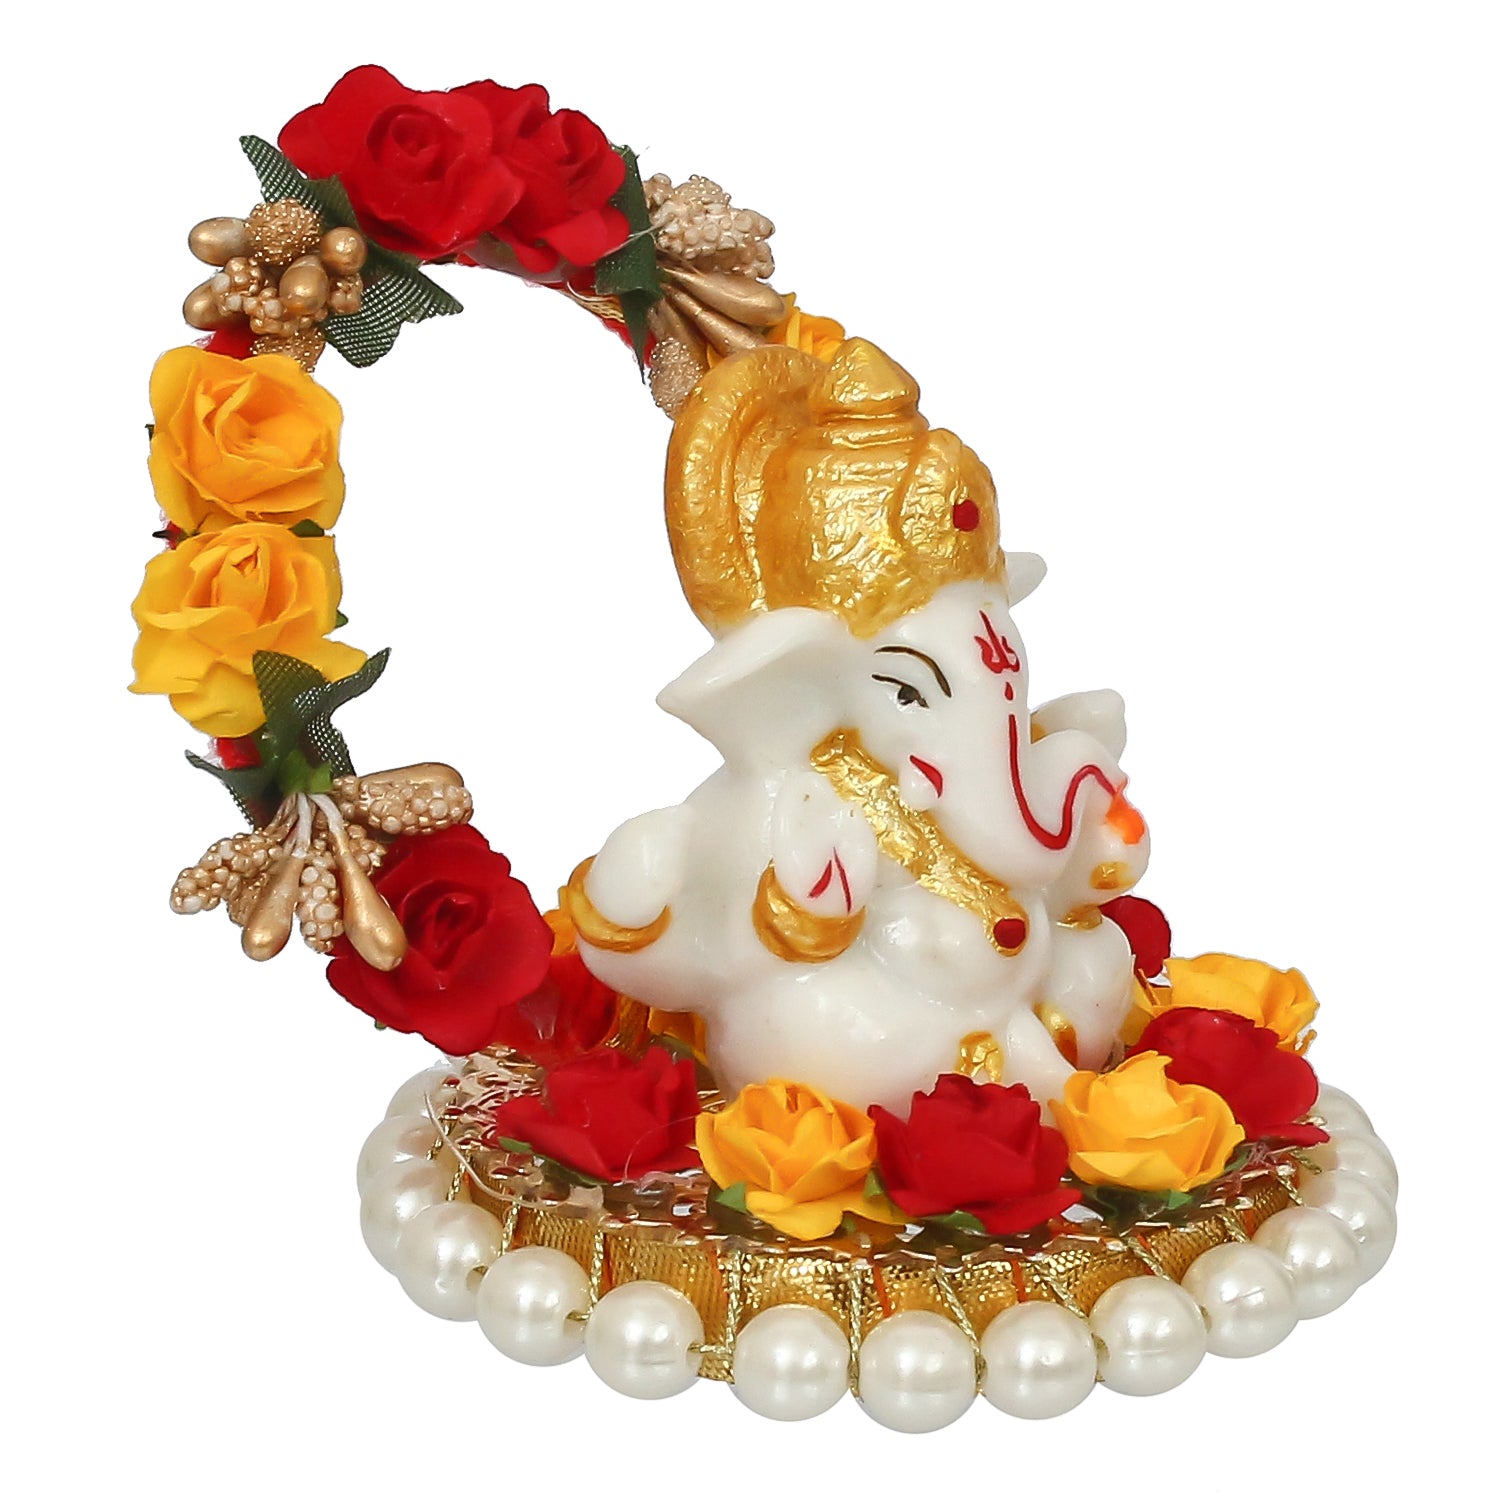 Polyresin Lord Ganesha Idol on Decorative Handcrafted Rose Flower Plate for Home and Car Dashboard 3